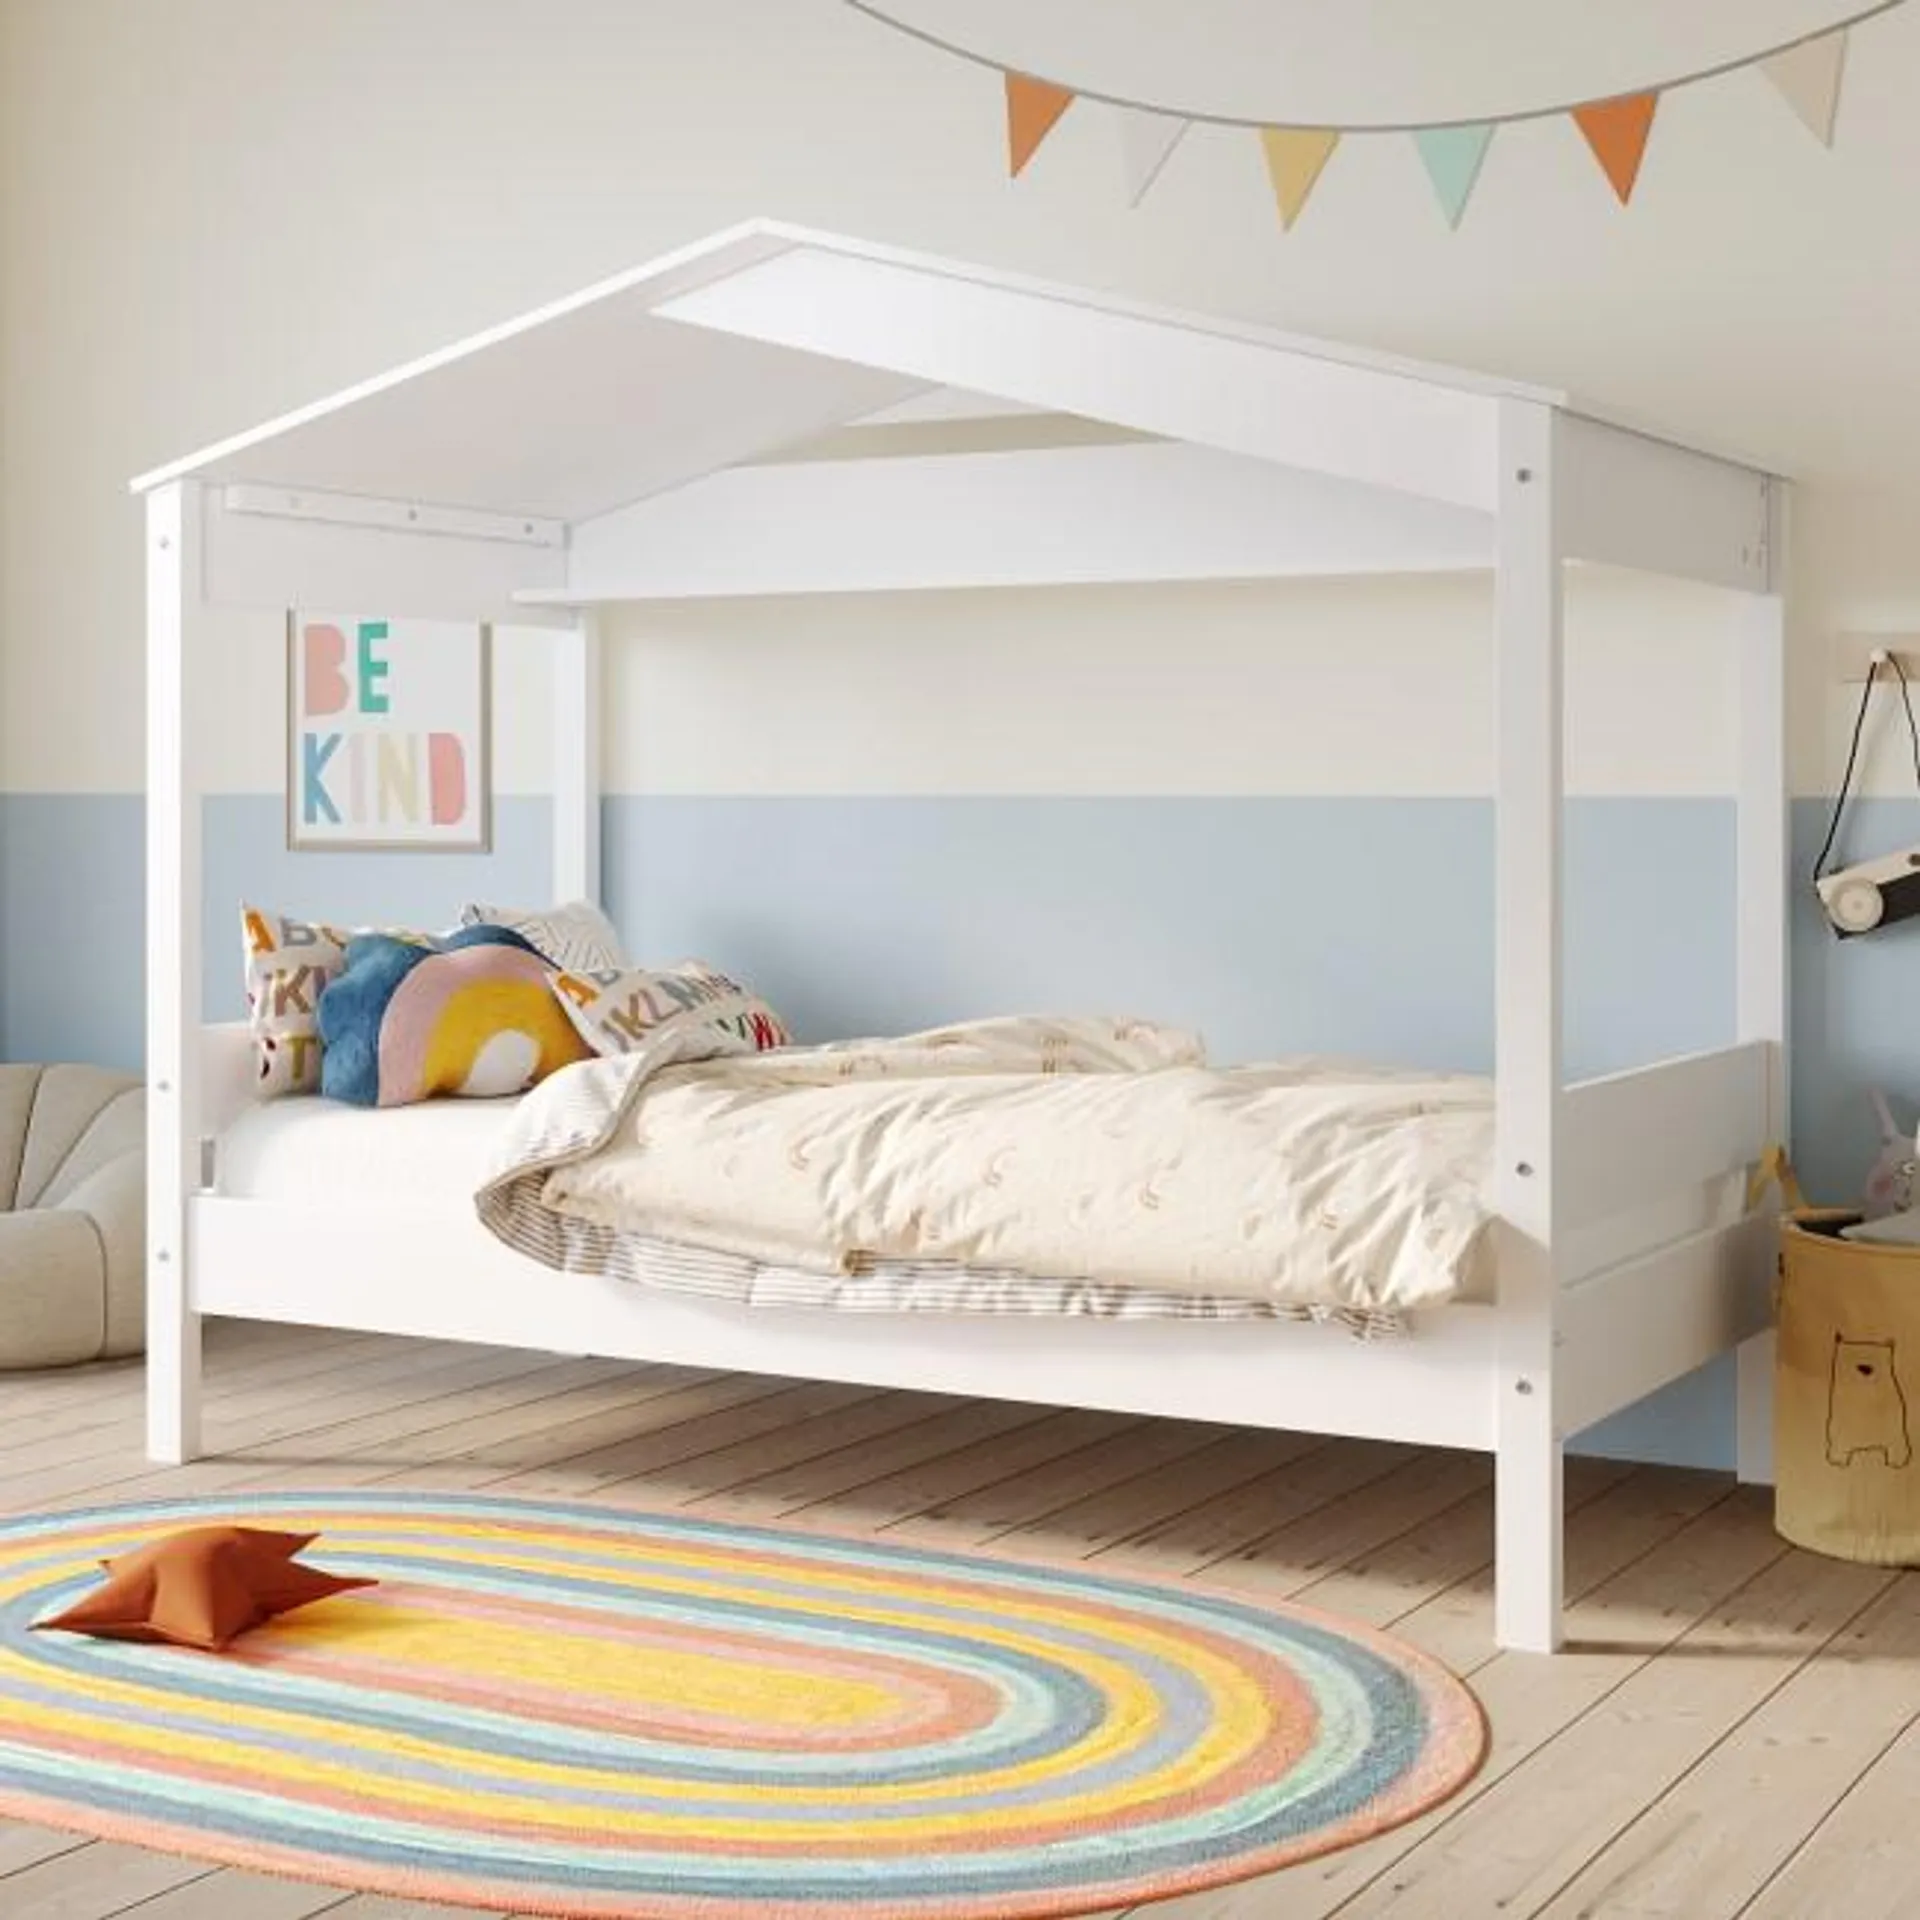 Single House Bed Frame in White - Remy